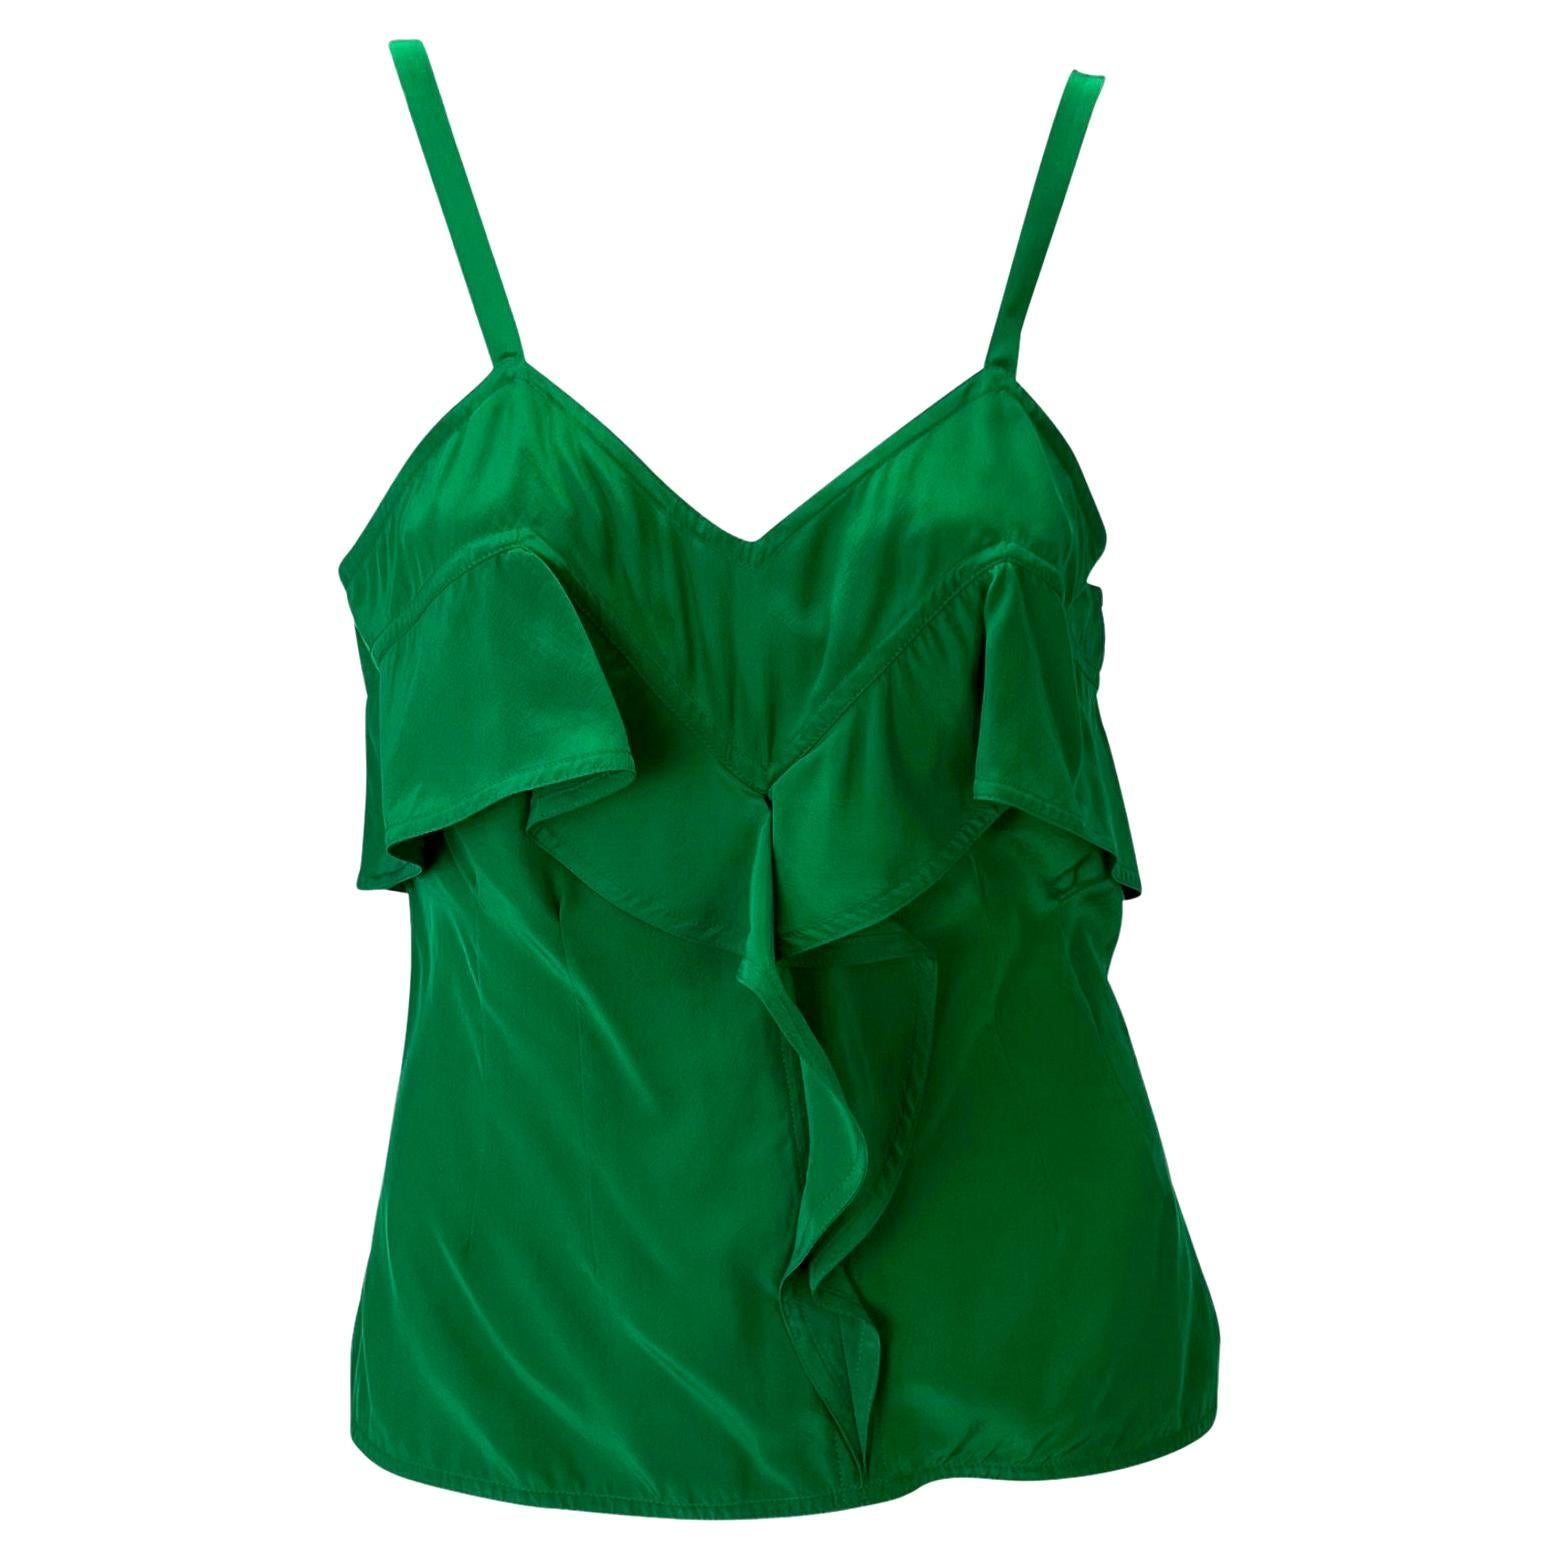 F/W 2003 Yves Saint Laurent by Tom Ford Emerald Green Silk Ruffle Tank Top For Sale